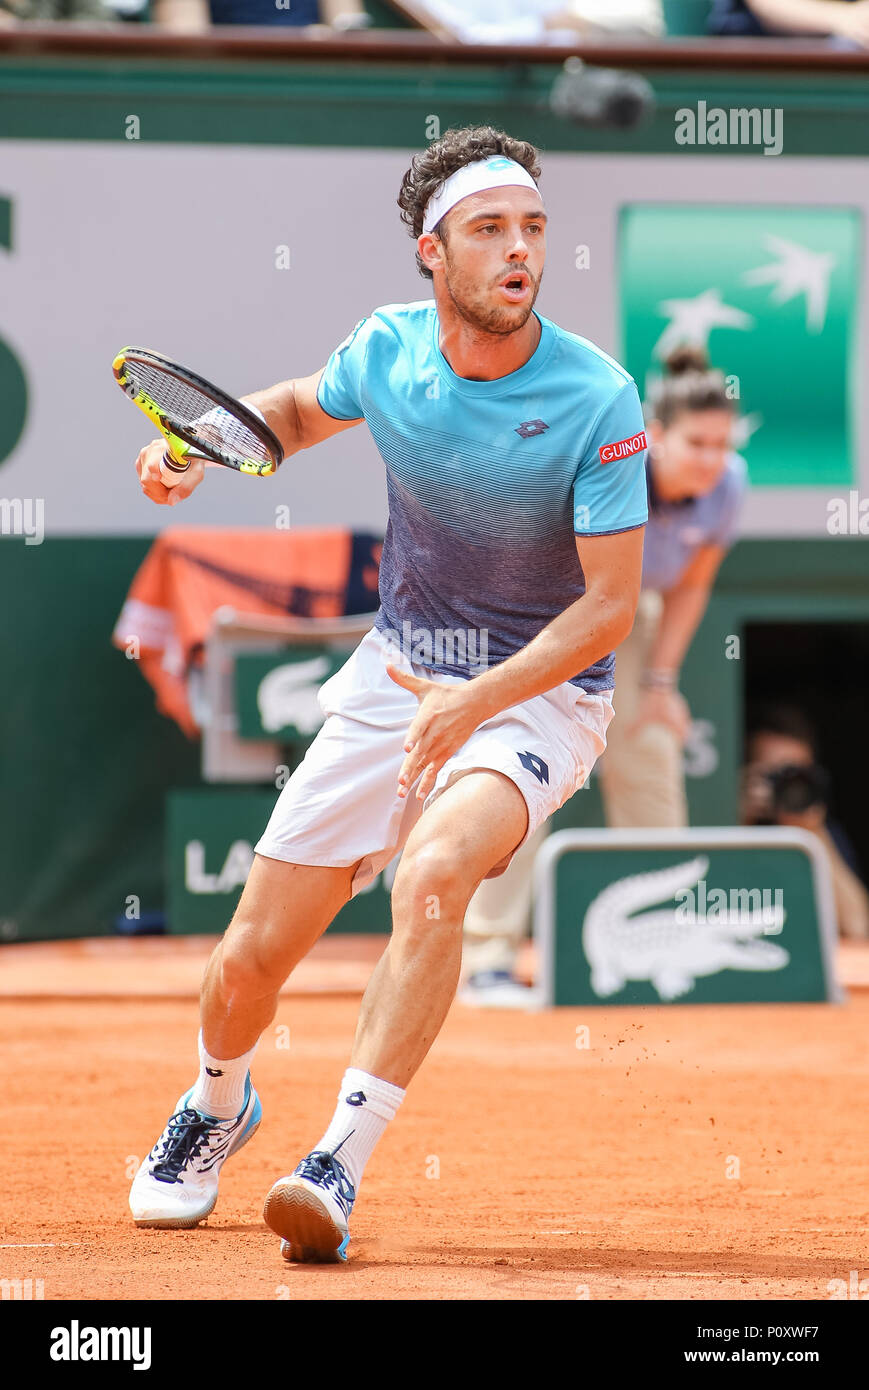 Marco Cecchinato (ITA), JUNE 8, 2018 - Tennis : Marco Cecchinato of Italy  during the Men's singles semi-final match of the French Open tennis  tournament against Dominic Thiem of Austria at the